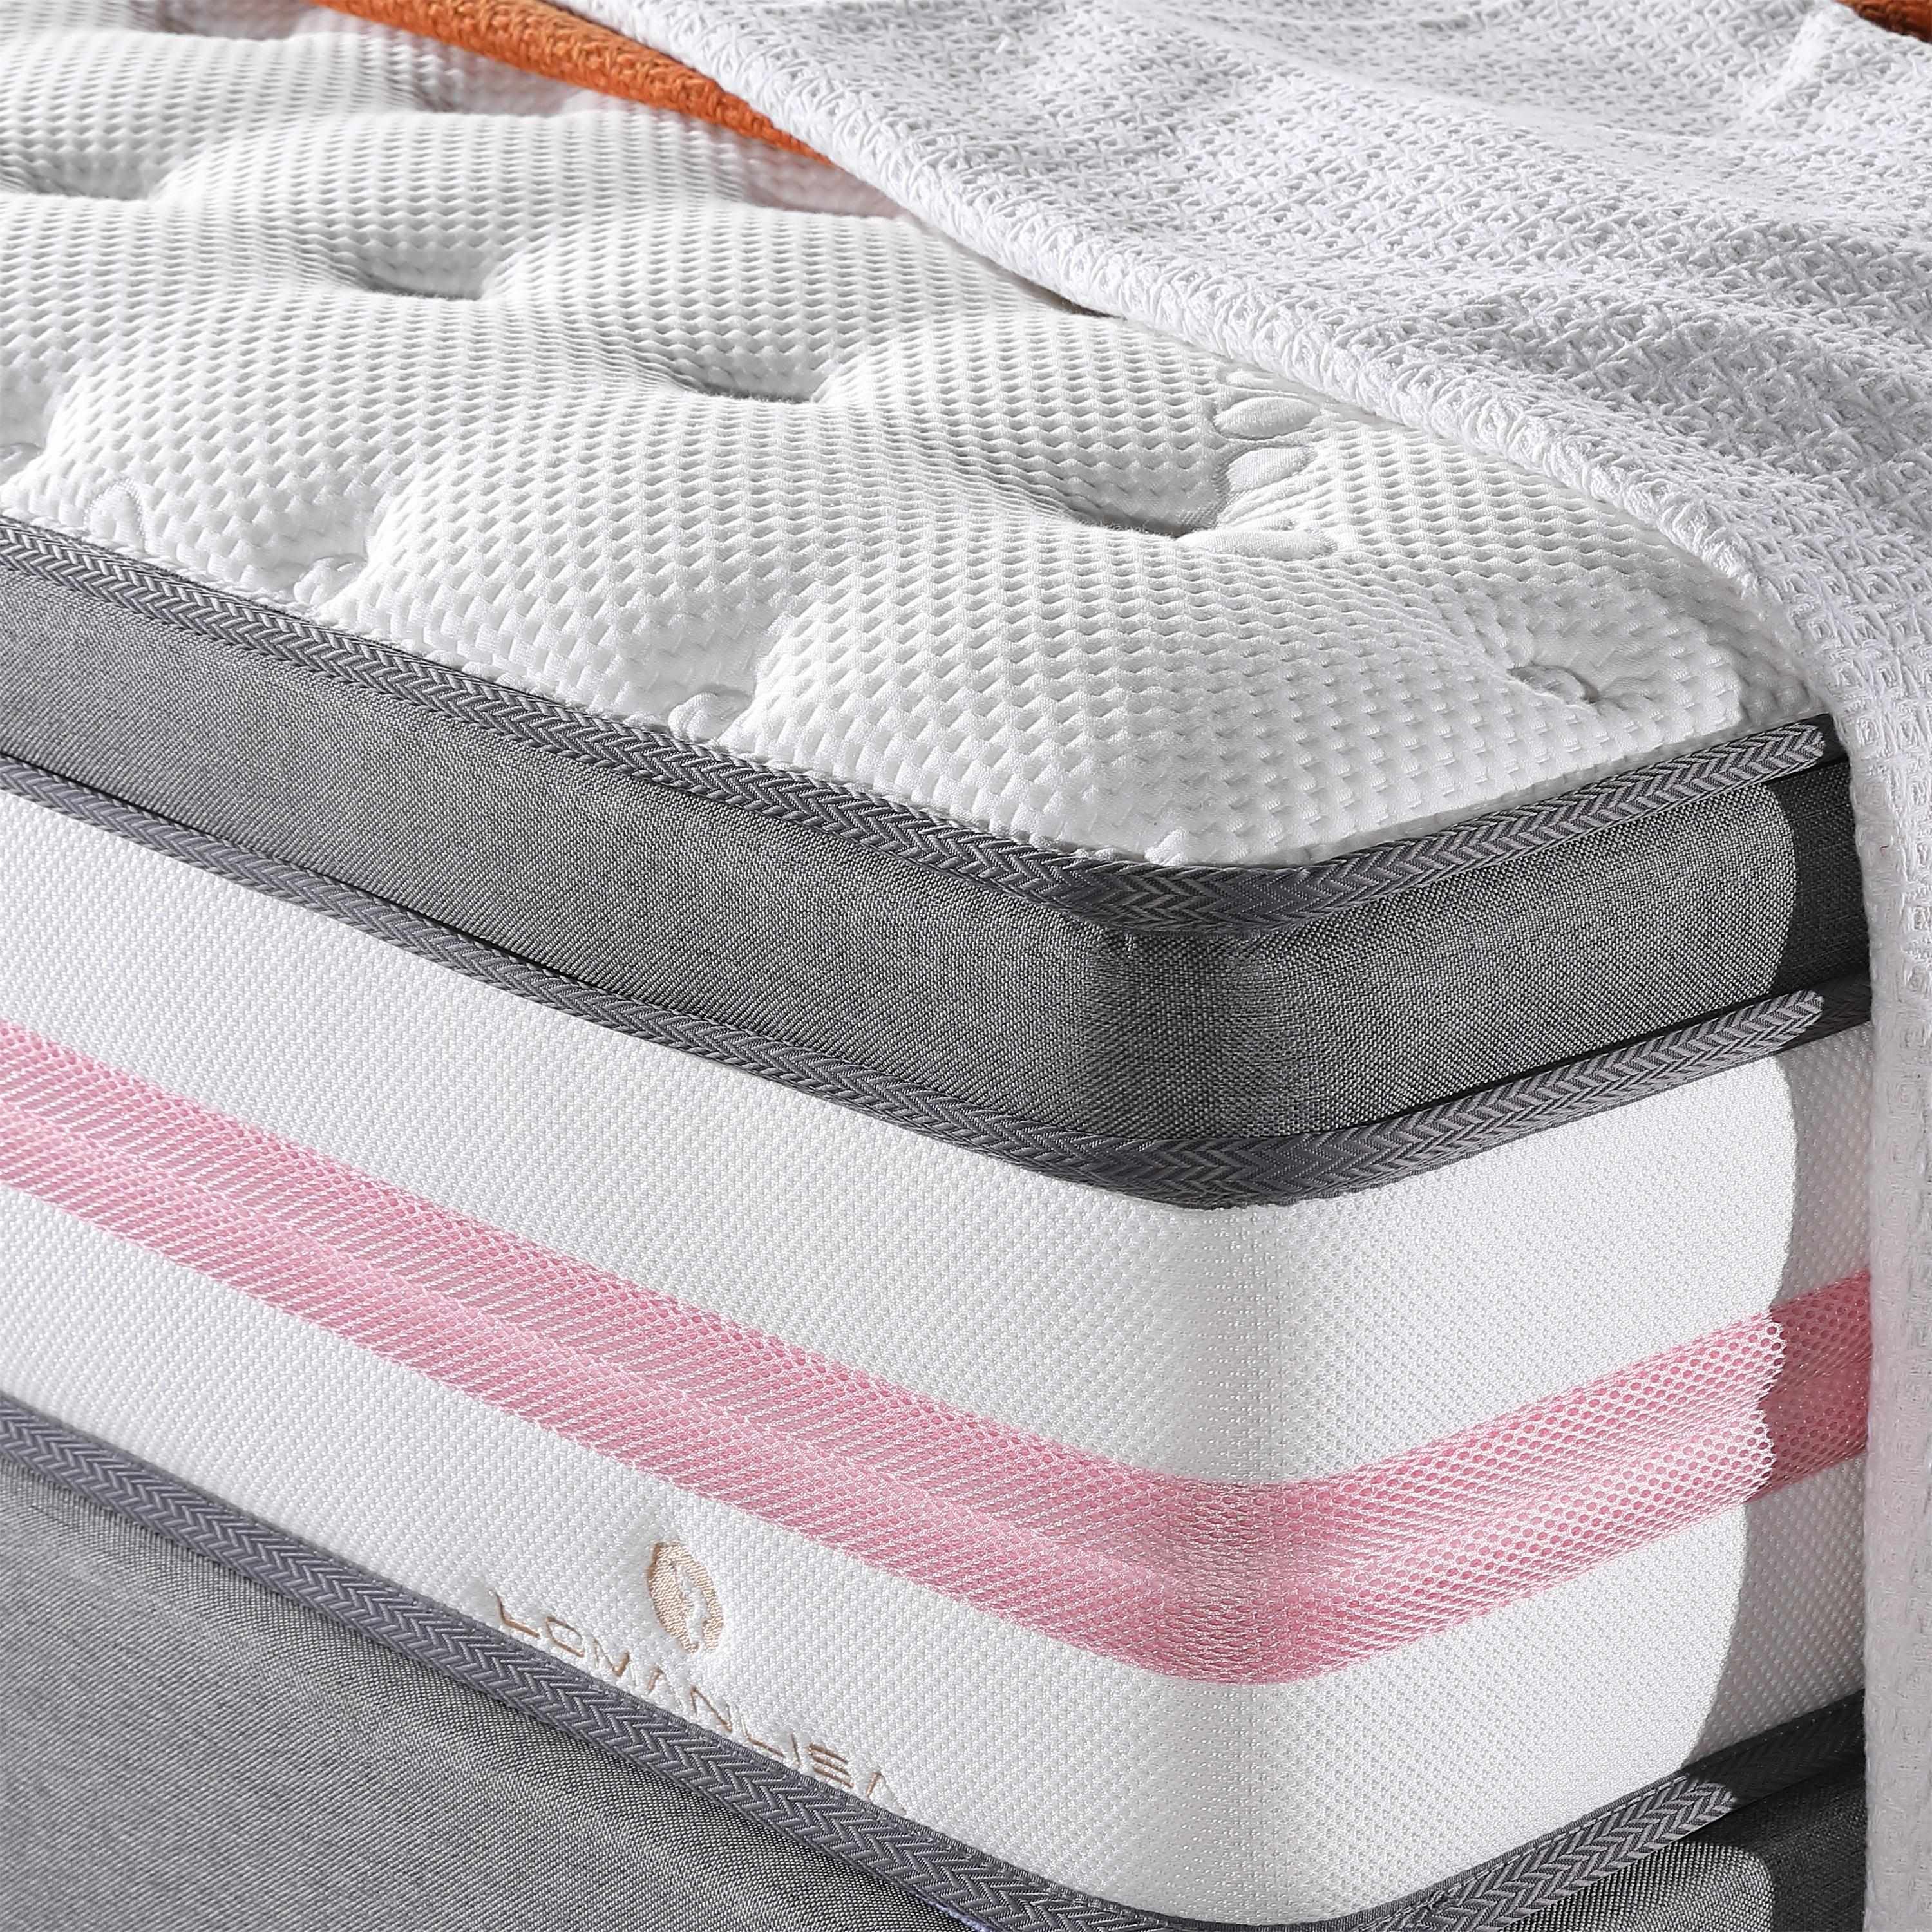 JLH-king size mattress and box spring for sale | Roll-Up Mattress | JLH-1